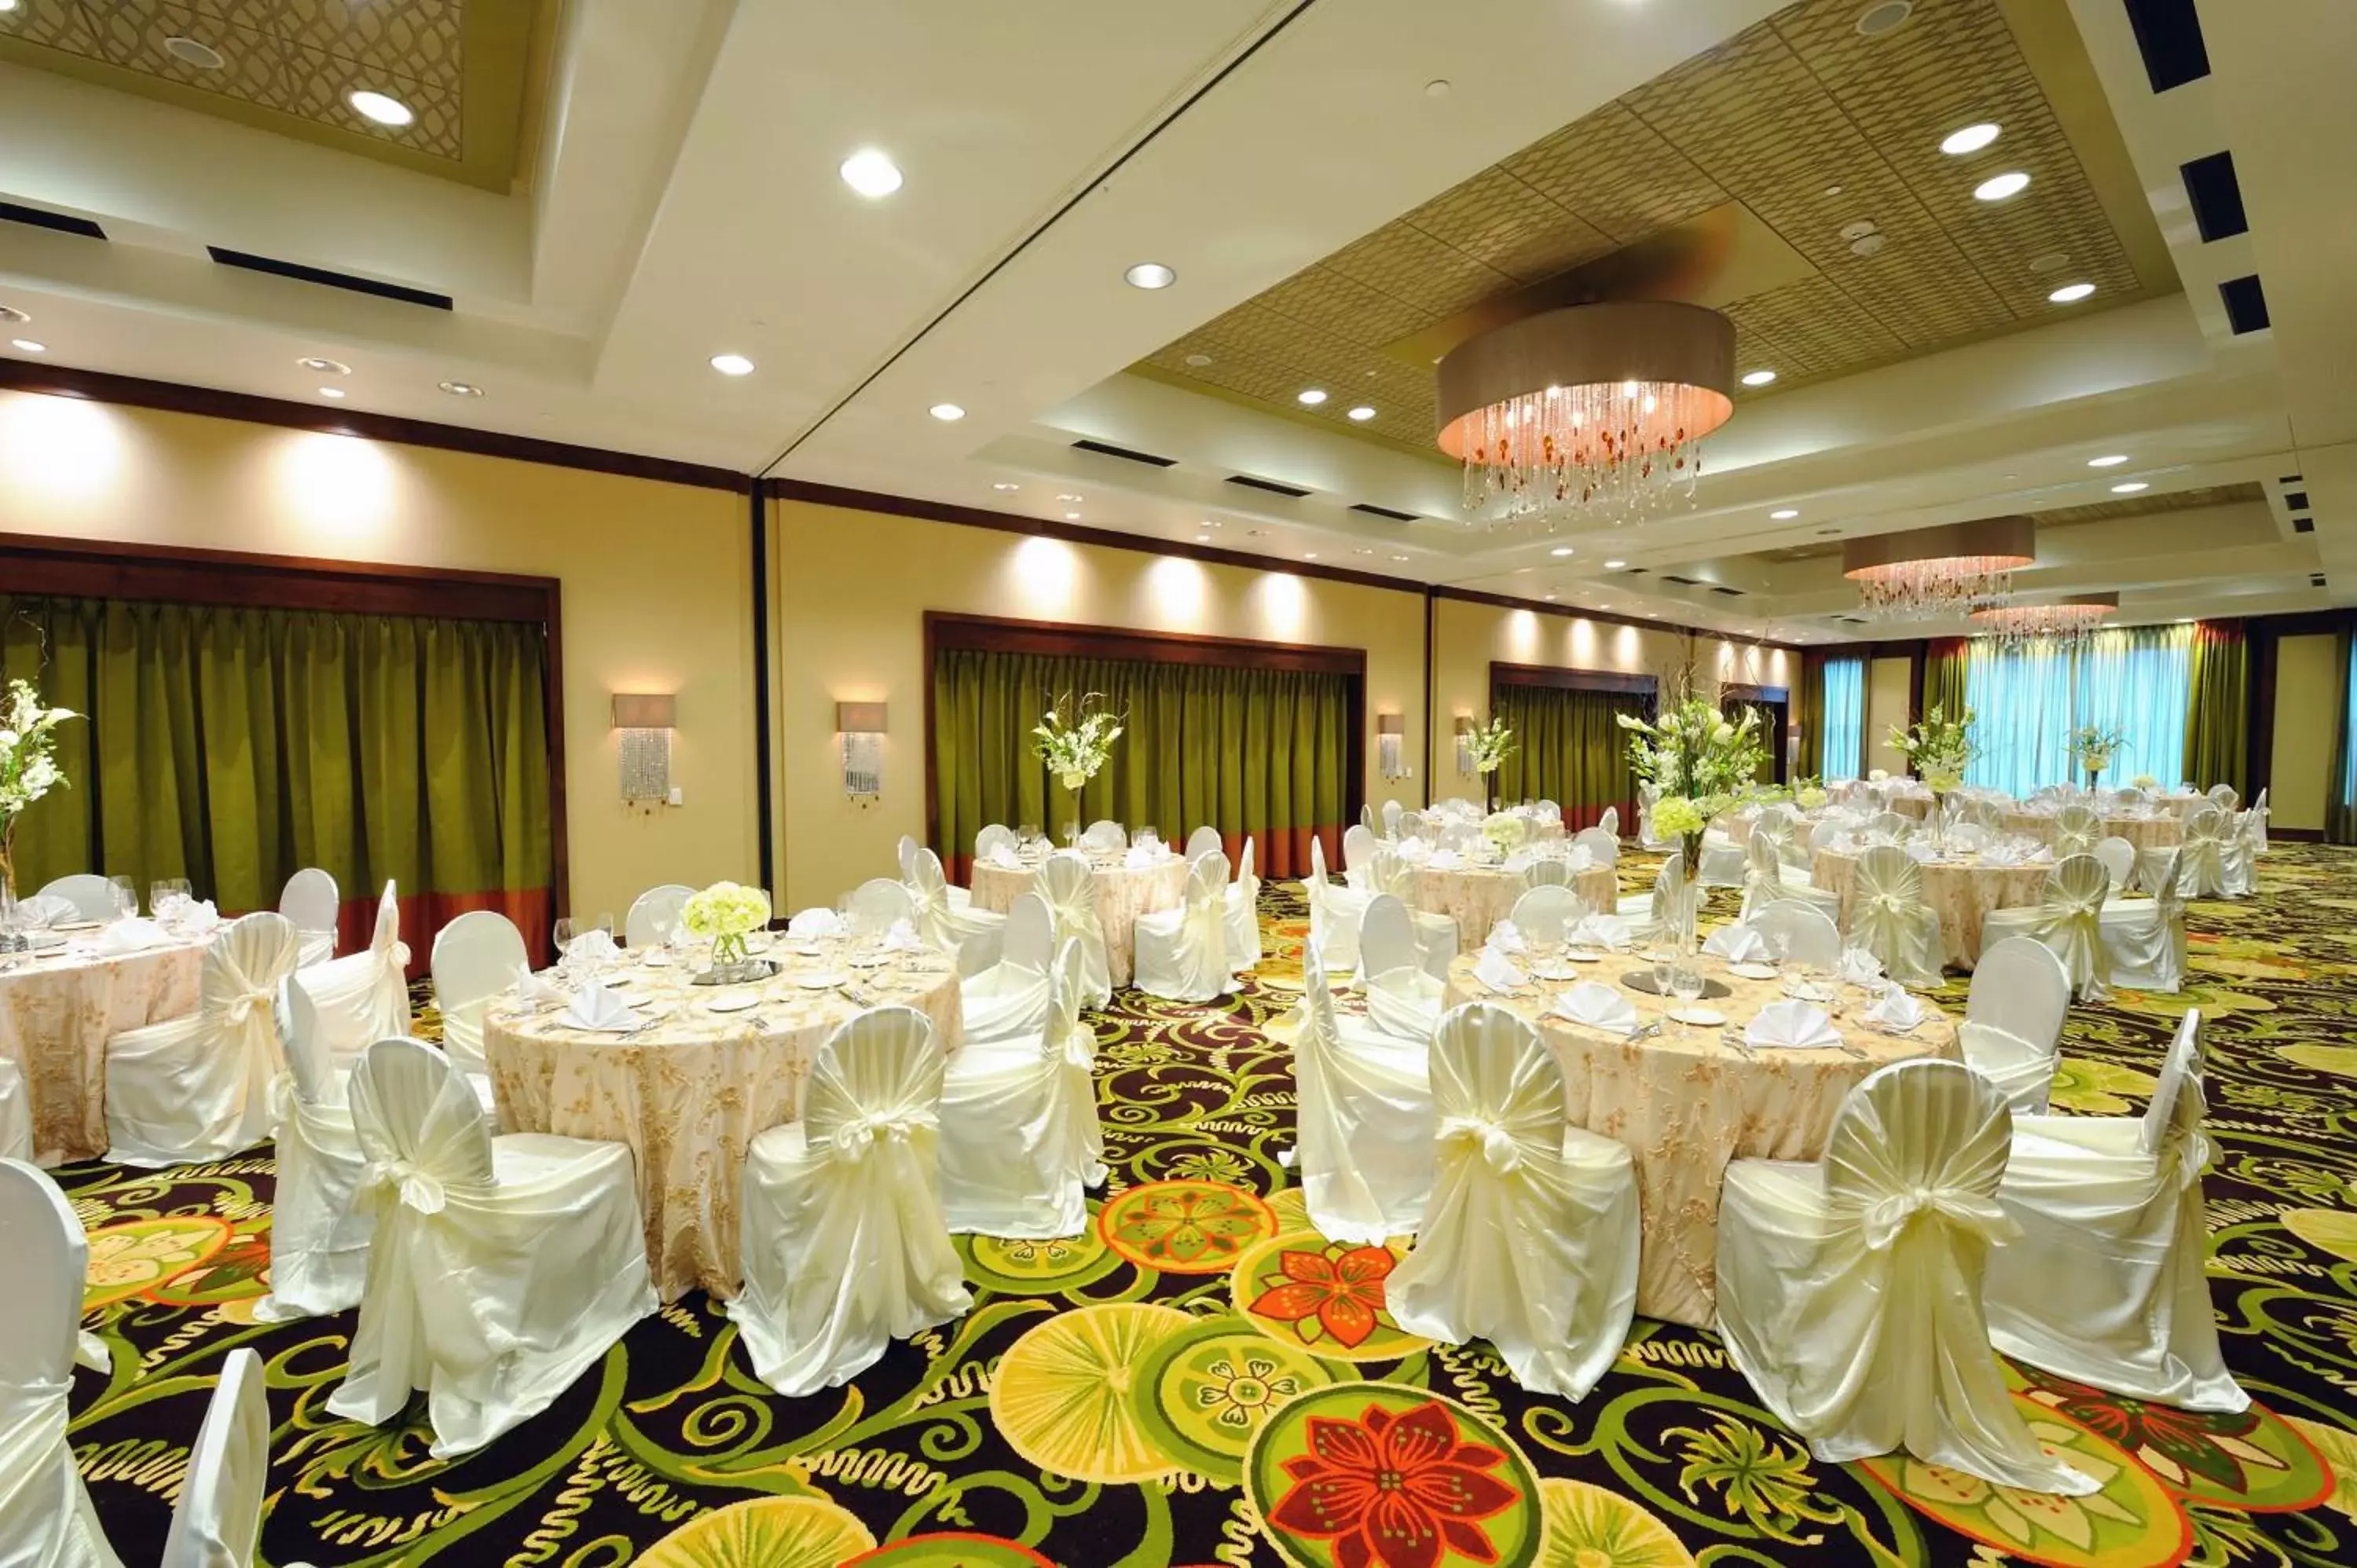 Meeting/conference room, Banquet Facilities in Embassy Suites Houston - Downtown